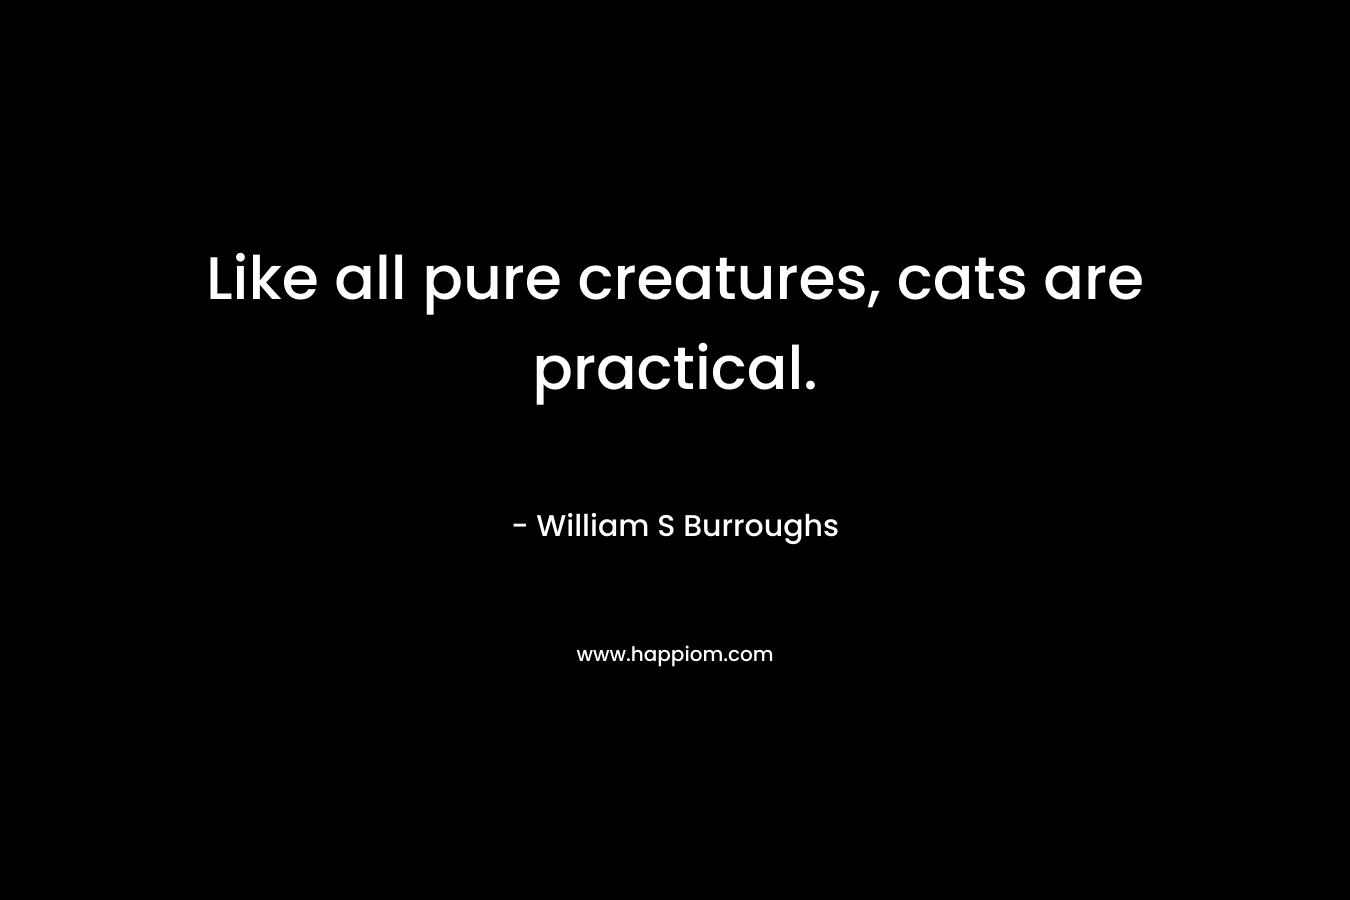 Like all pure creatures, cats are practical. – William S Burroughs